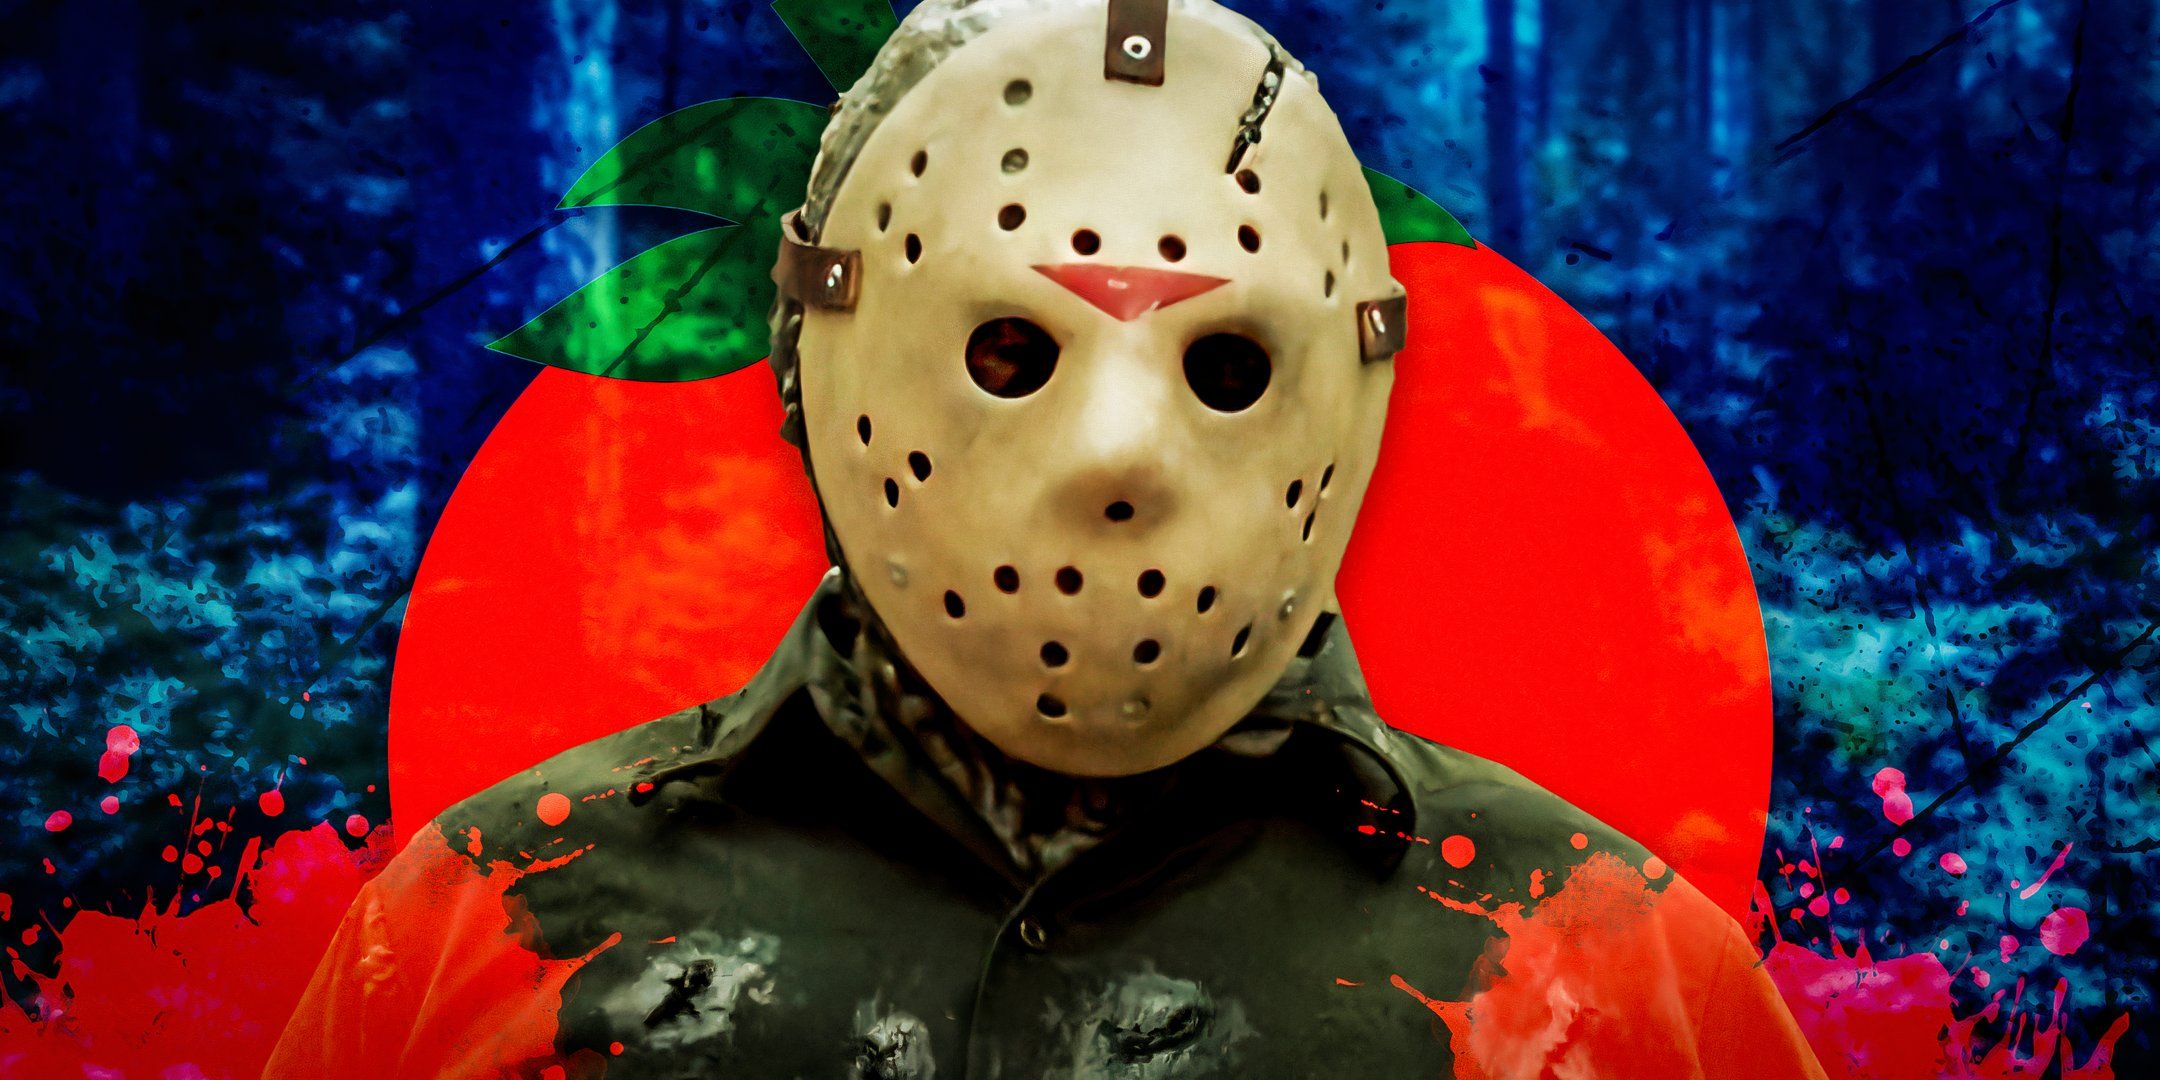 Jason from Friday the 13th Franchise